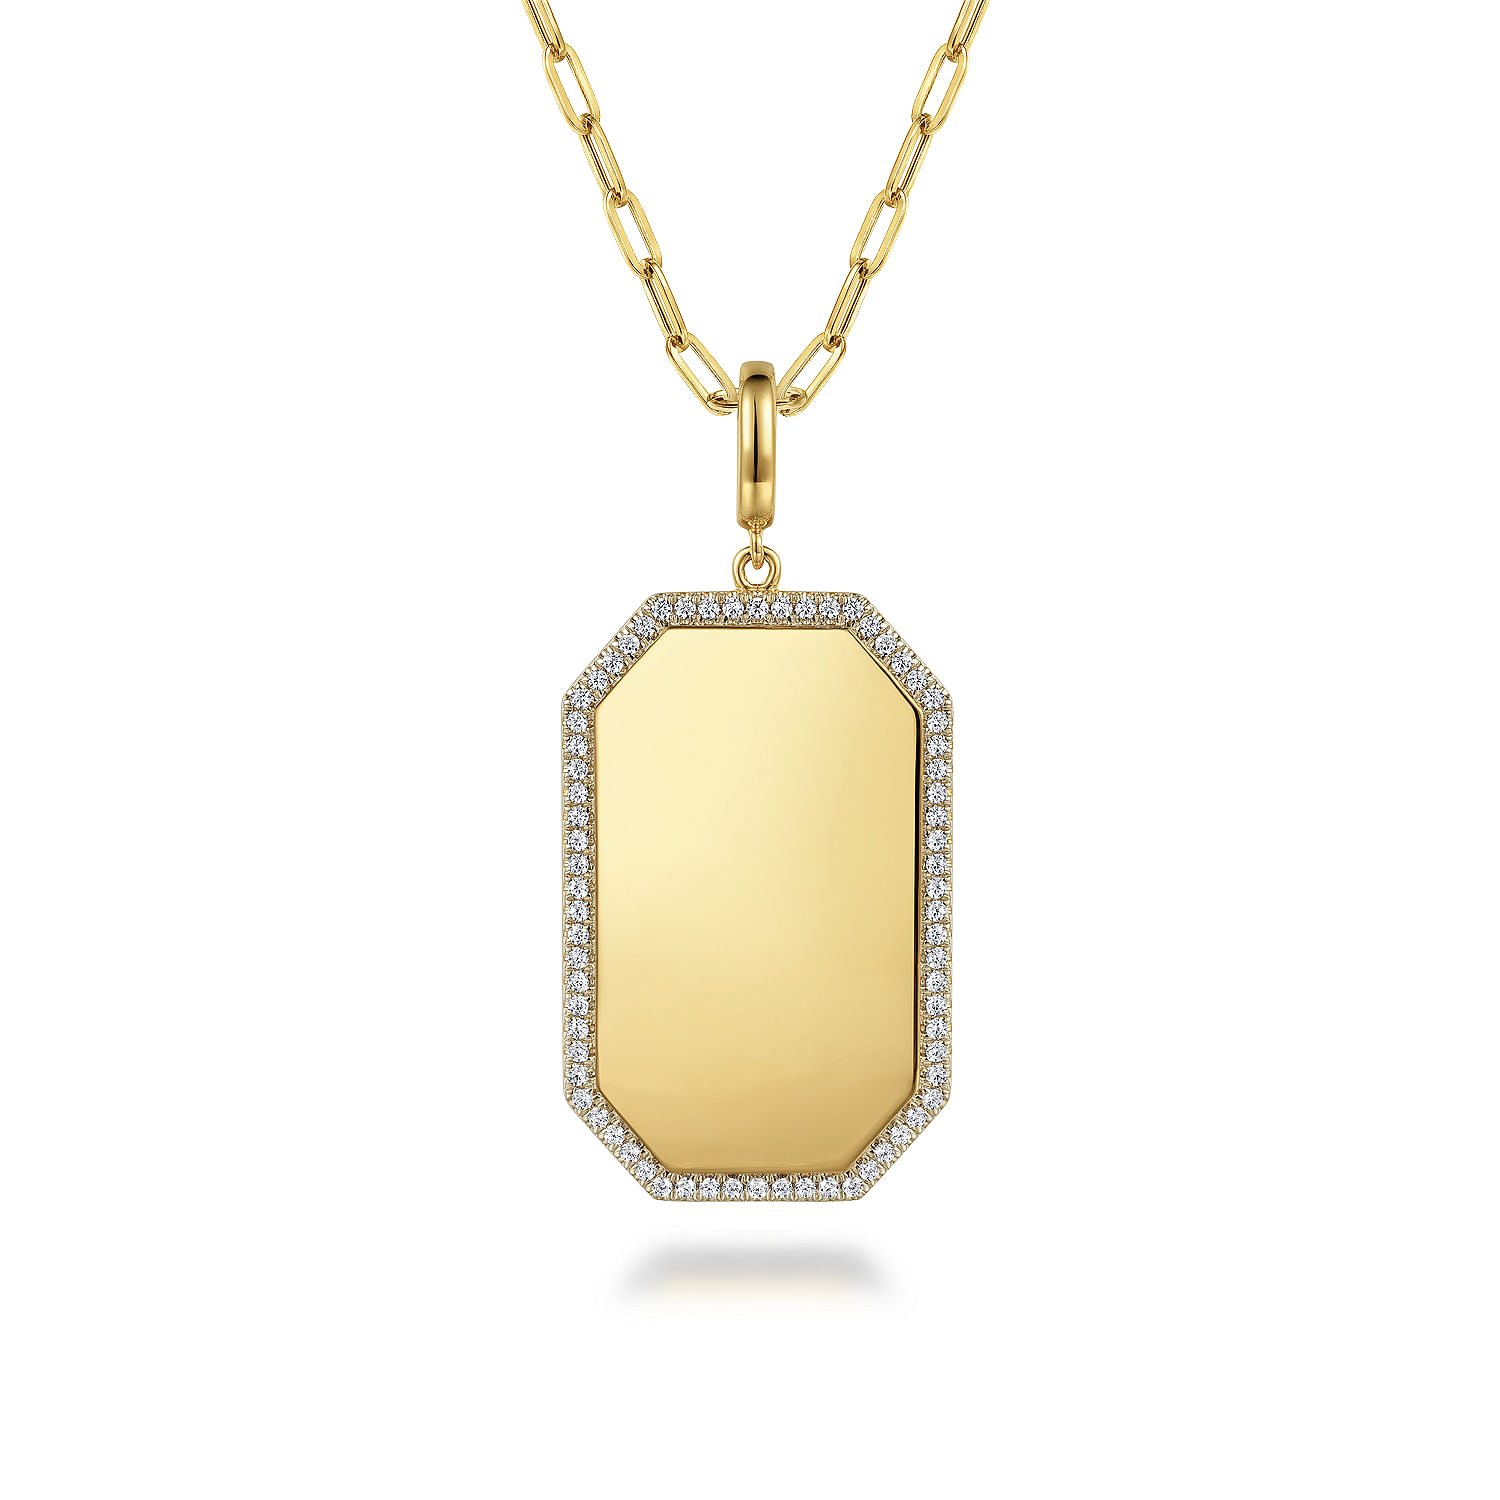 14K Yellow Gold Diamond Personalized Elongated Octagonal Shaped Medallion Pendant Necklace with Hollow Paperclip Chain